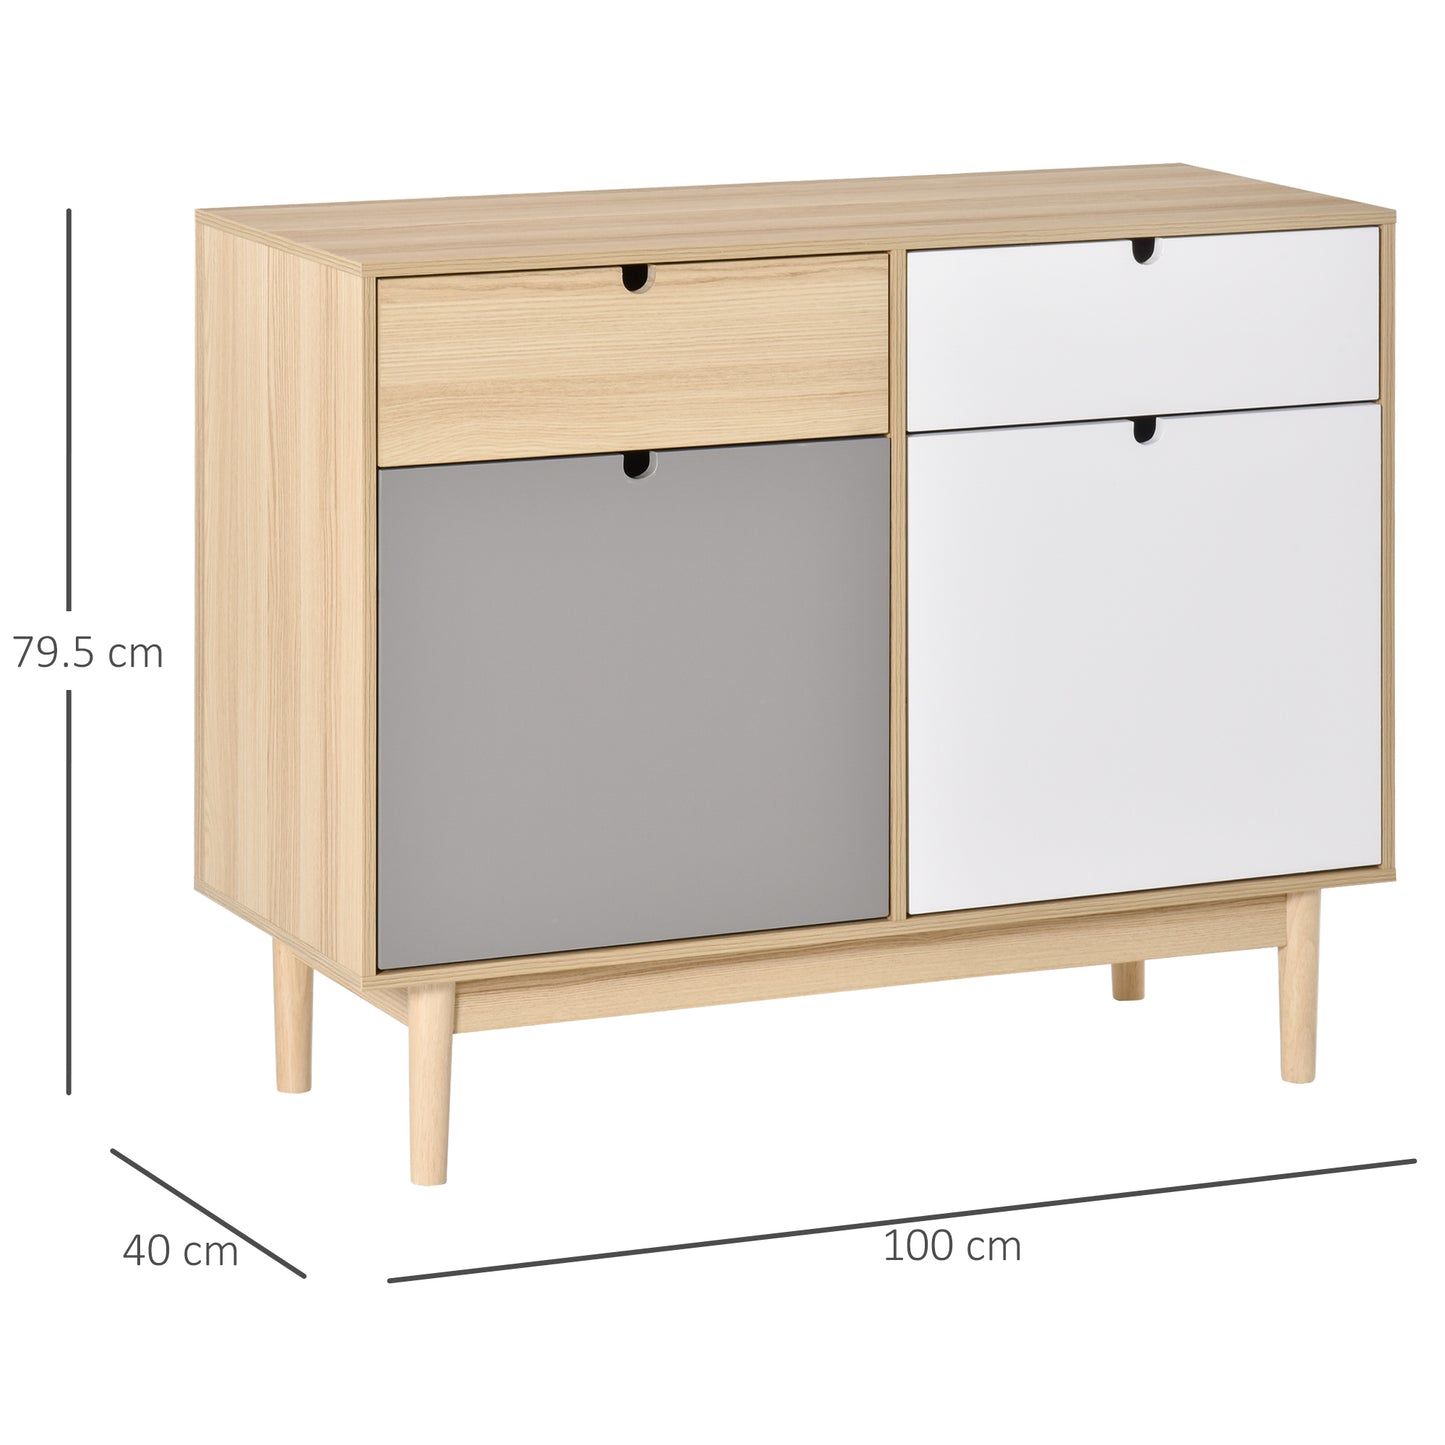 HOMCOM Sideboard Storage Cabinet Kitchen Cupboard with Drawers for Bedroom, Living Room